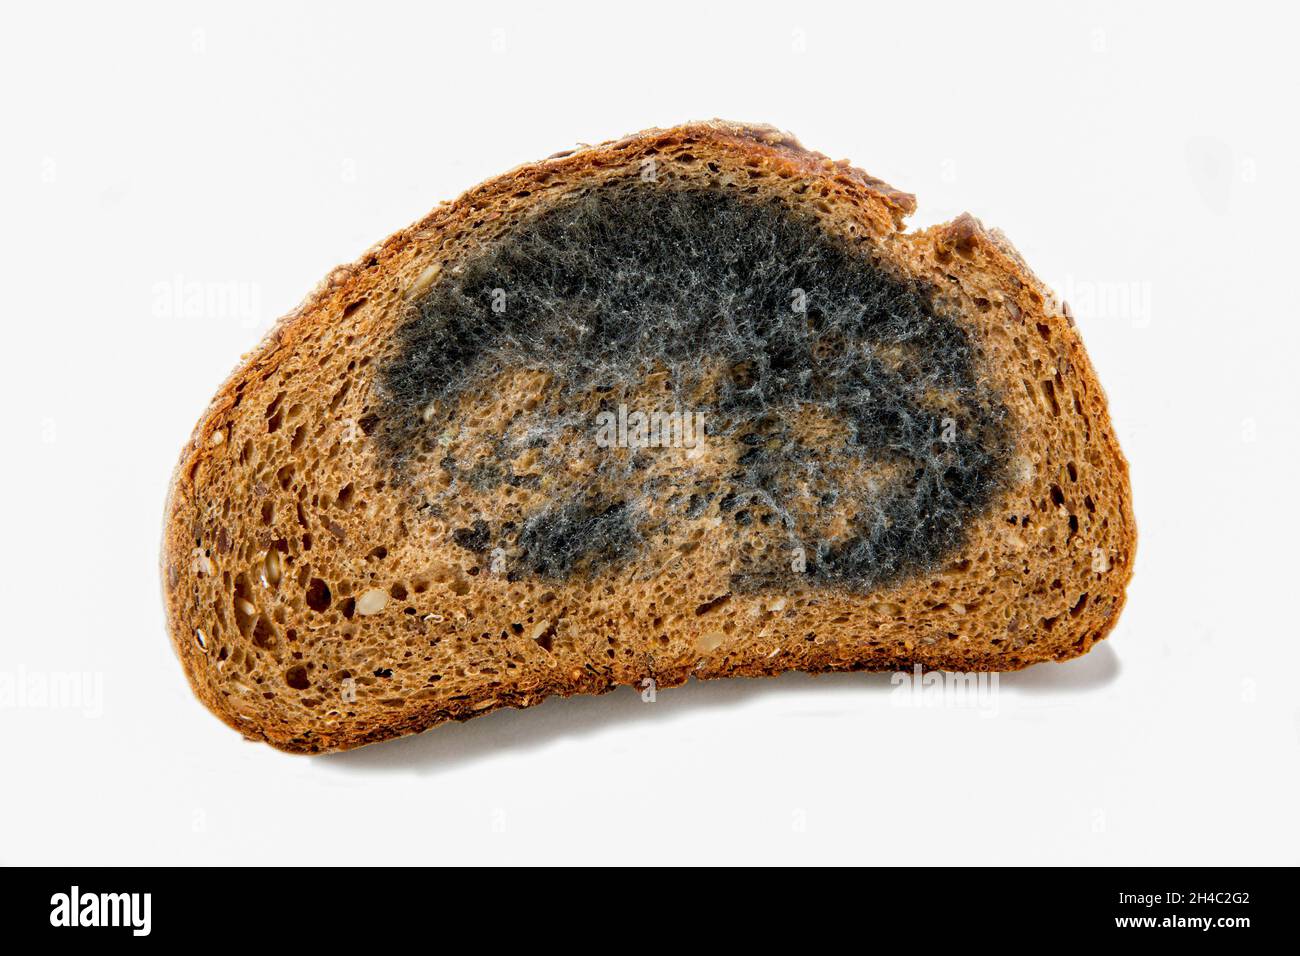 https://c8.alamy.com/comp/2H4C2G2/moldy-slice-of-rye-bread-isolated-on-a-white-background-2H4C2G2.jpg